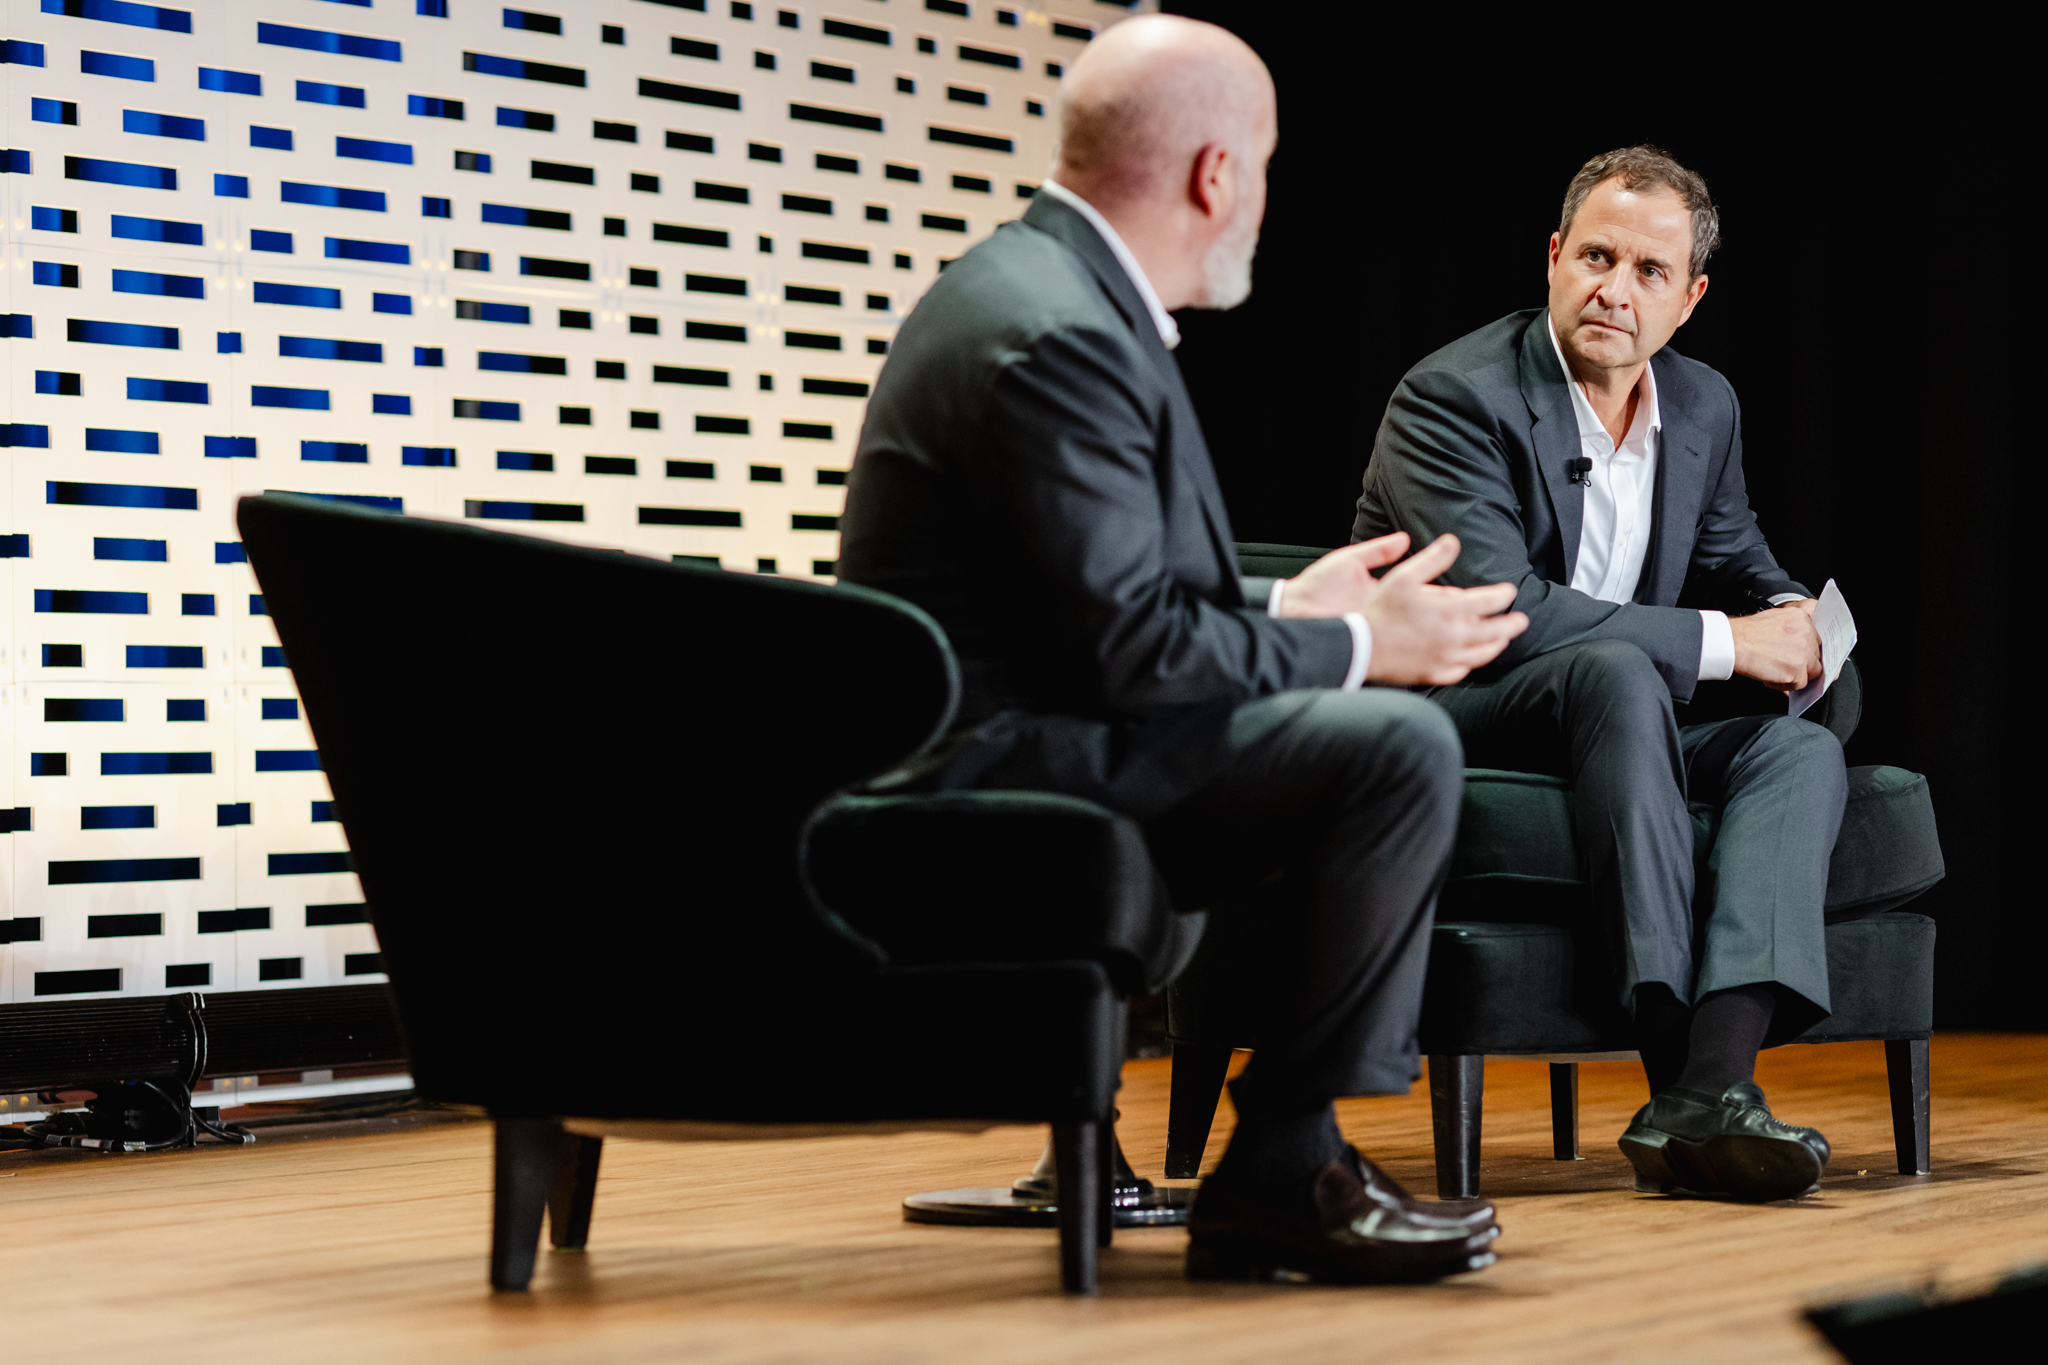 Two men engaged in a conversation on stage during a conference.